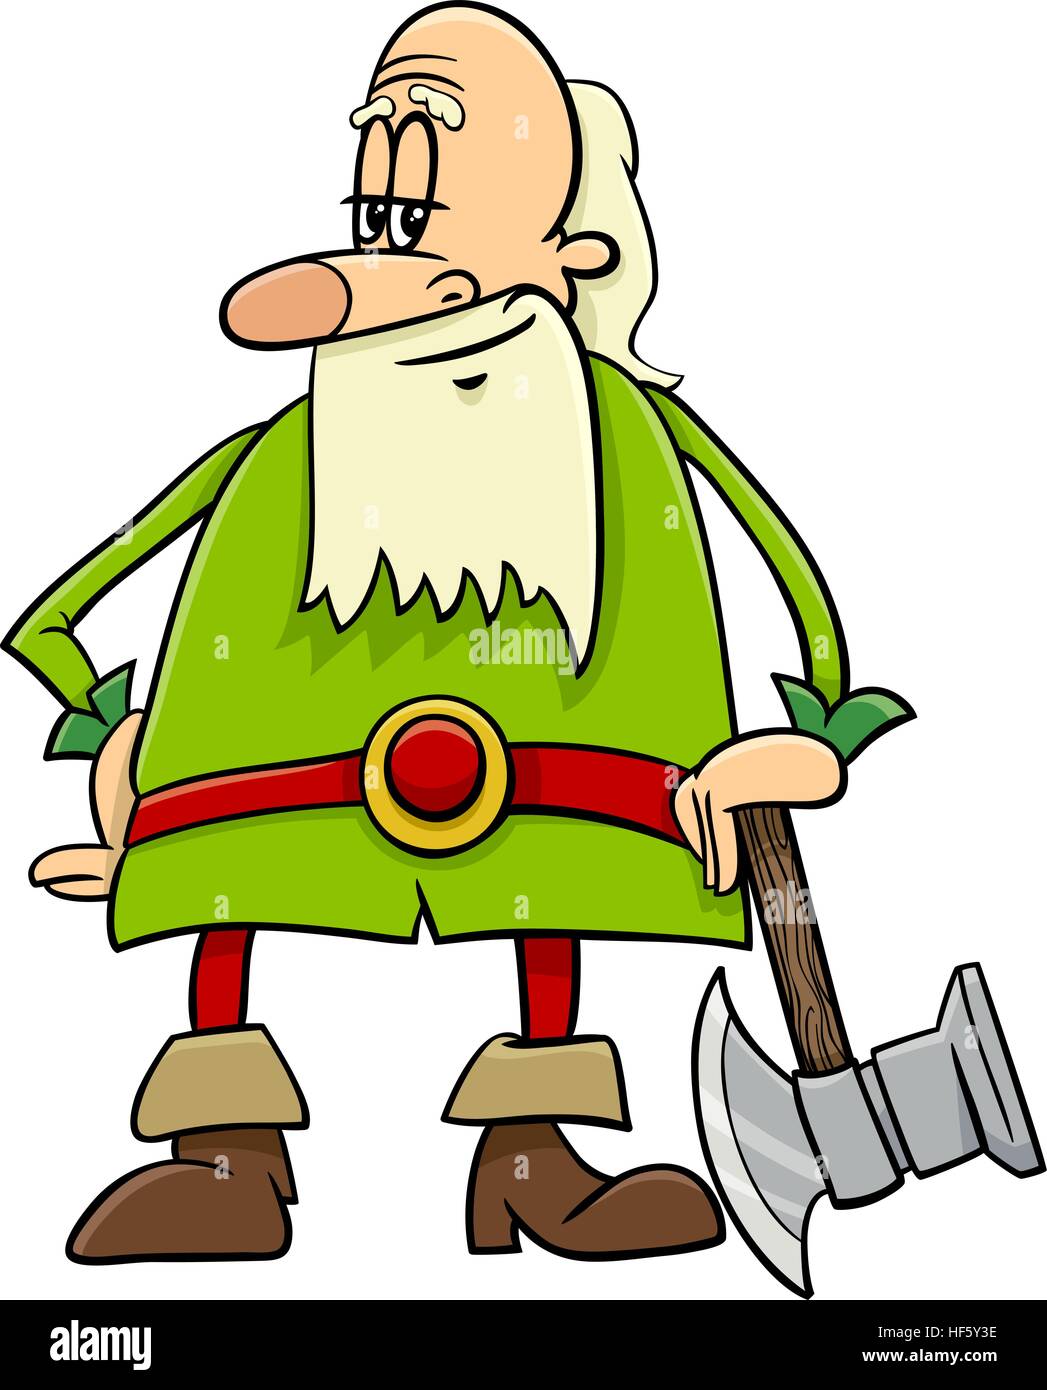 Cartoon Illustration of Dwarf with Axe Fantasy Character Stock Vector